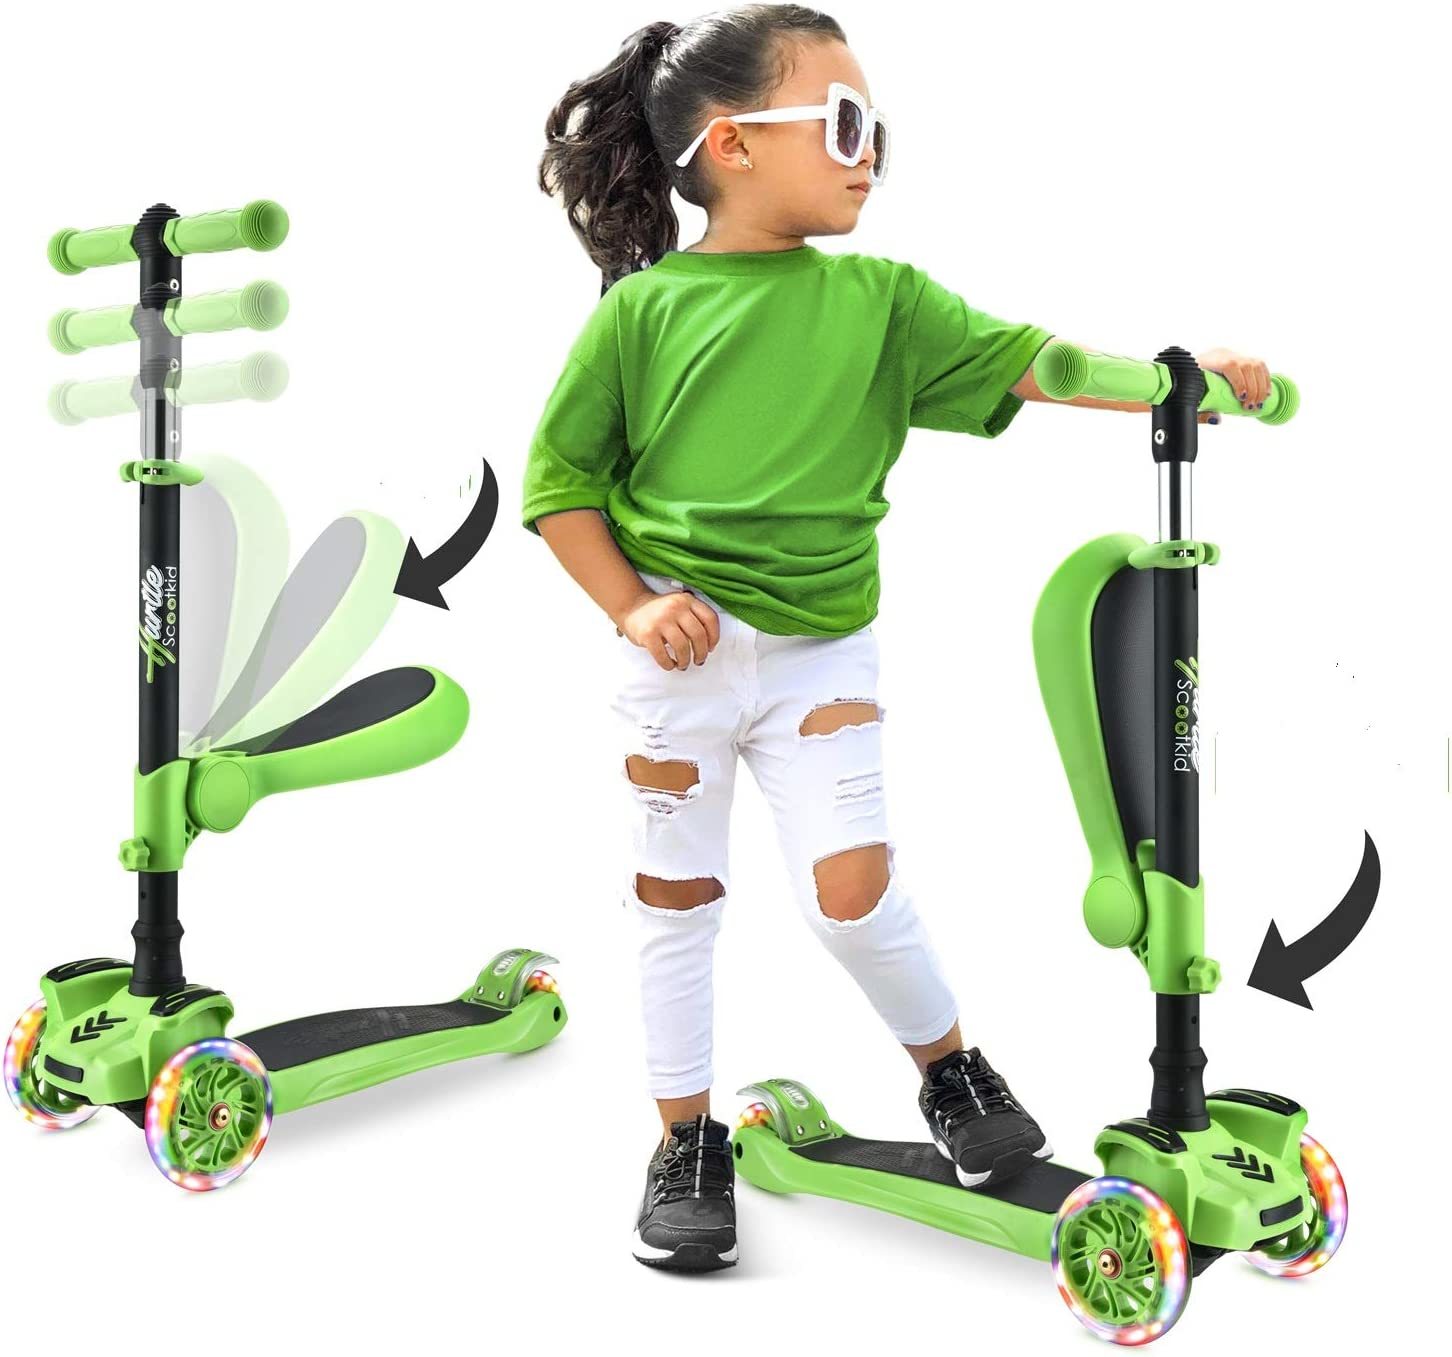 Hurtle Hurfs56 Offers The 3 Wheeled Scooter For Kids - Stand And Cruise - $64.96